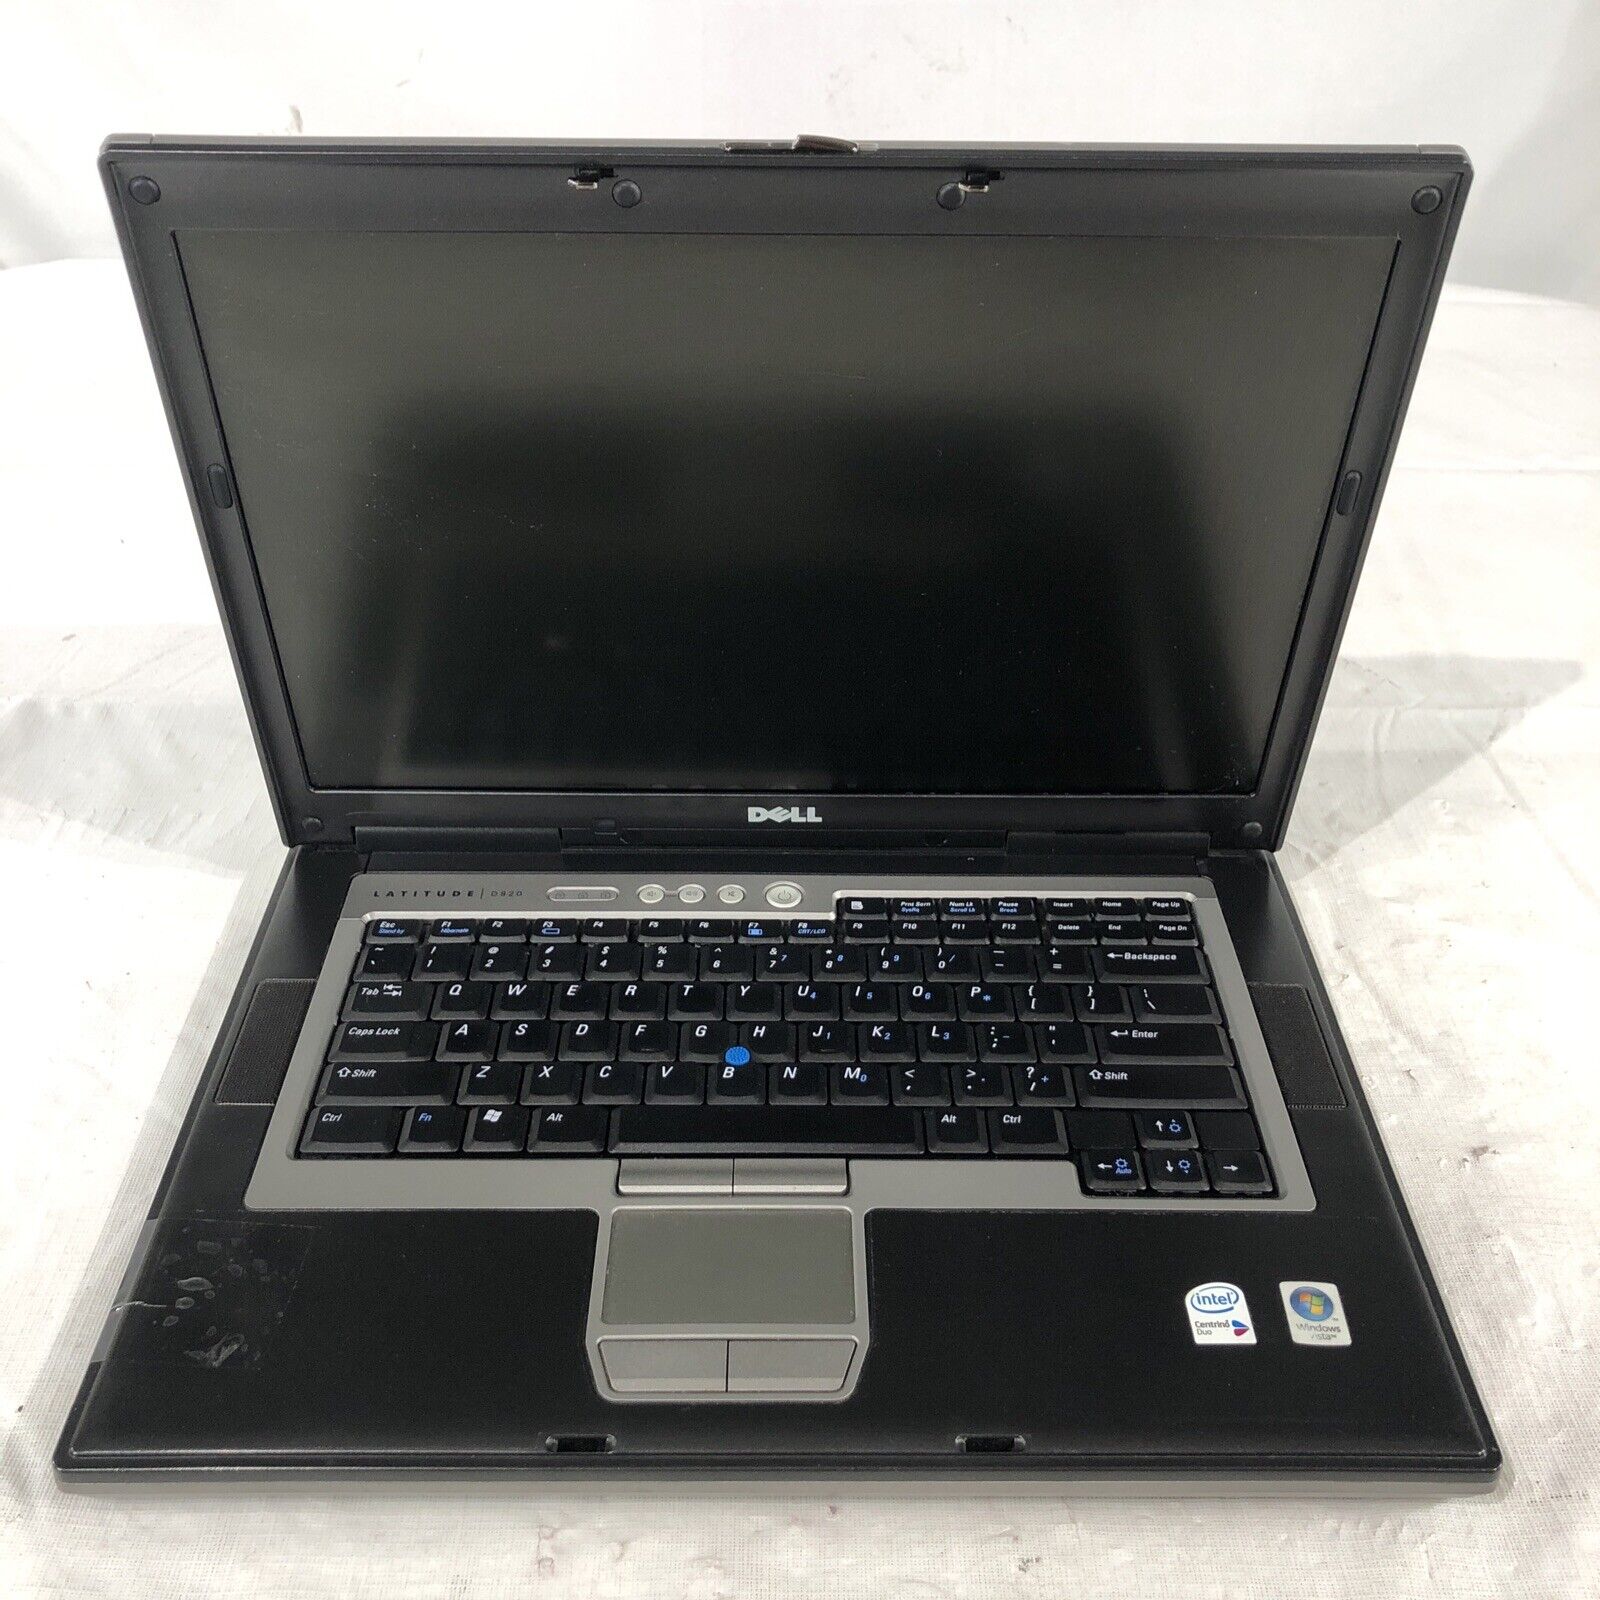 Dell Latitude D820 Laptop Intel Core 2 Duo 2.0 GHz 4 GB ram No HDD/No OS